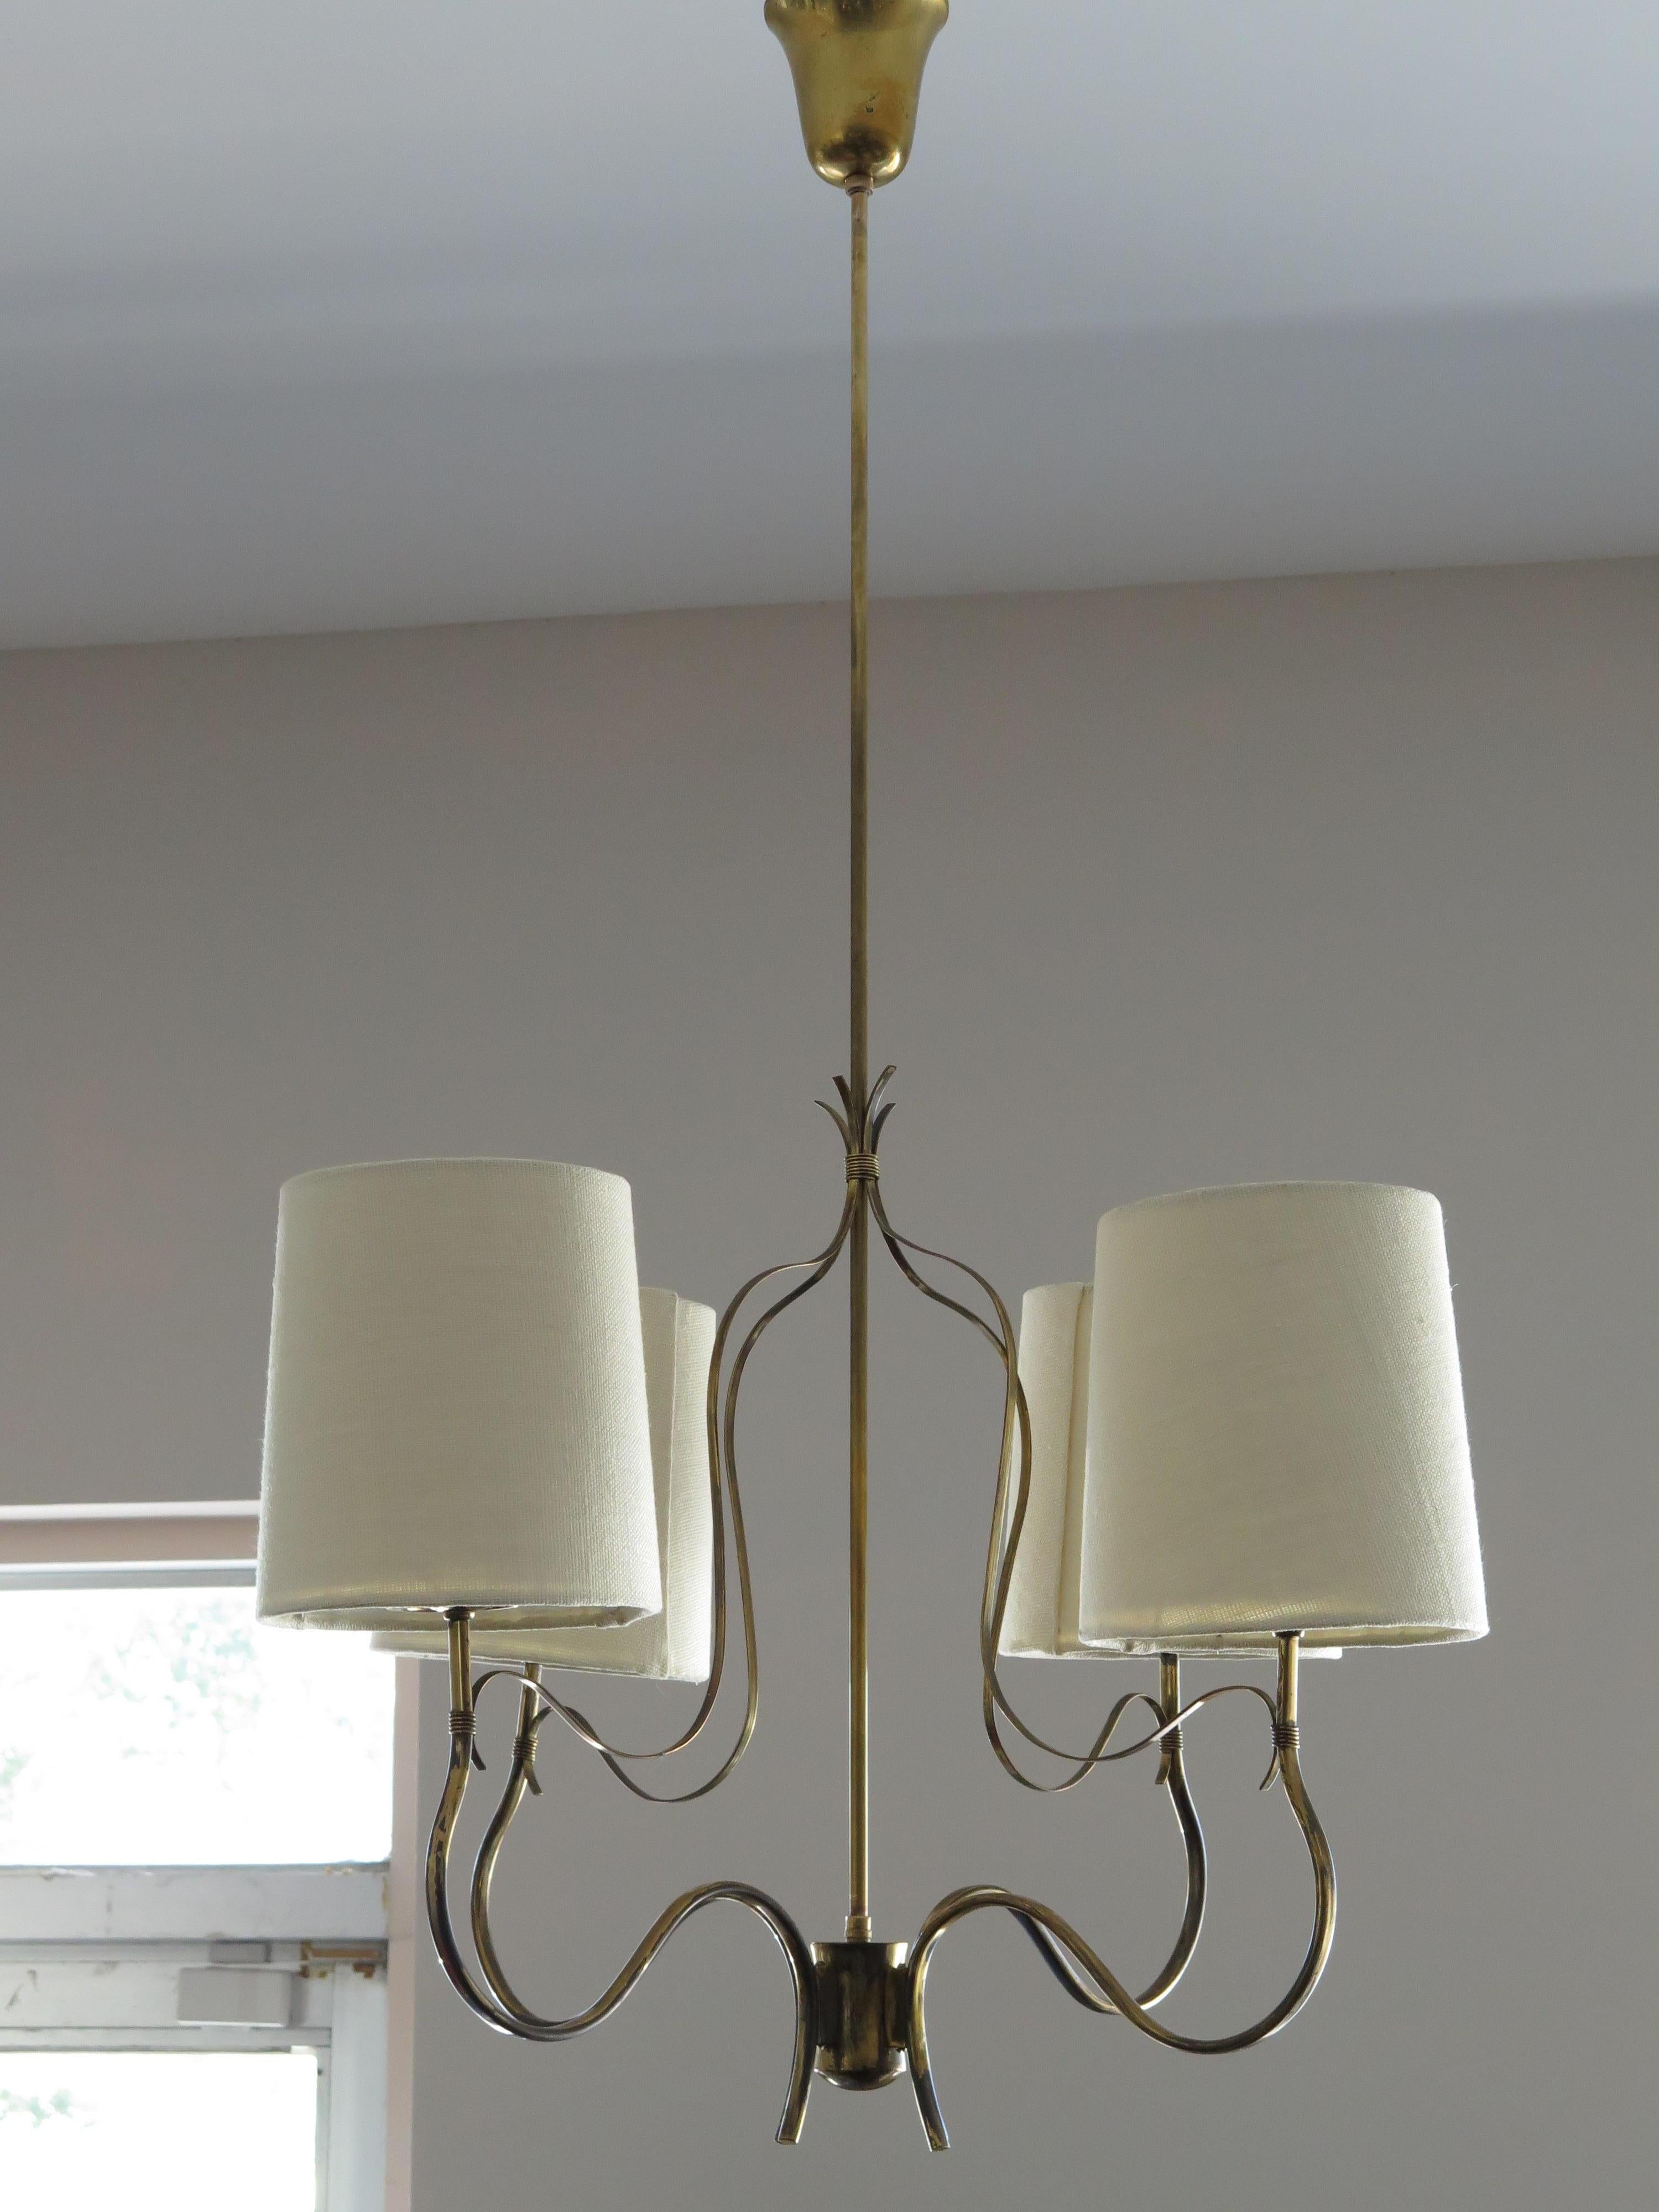 Elegant and rare Paavo Tynell, Taito four arm chandelier. Model 9001/4. Includes custom made linen shades, original sockets, brass has patina and oxidation. Stamped Taito, polished/satin glass diffusers. Small scale-approx. 24